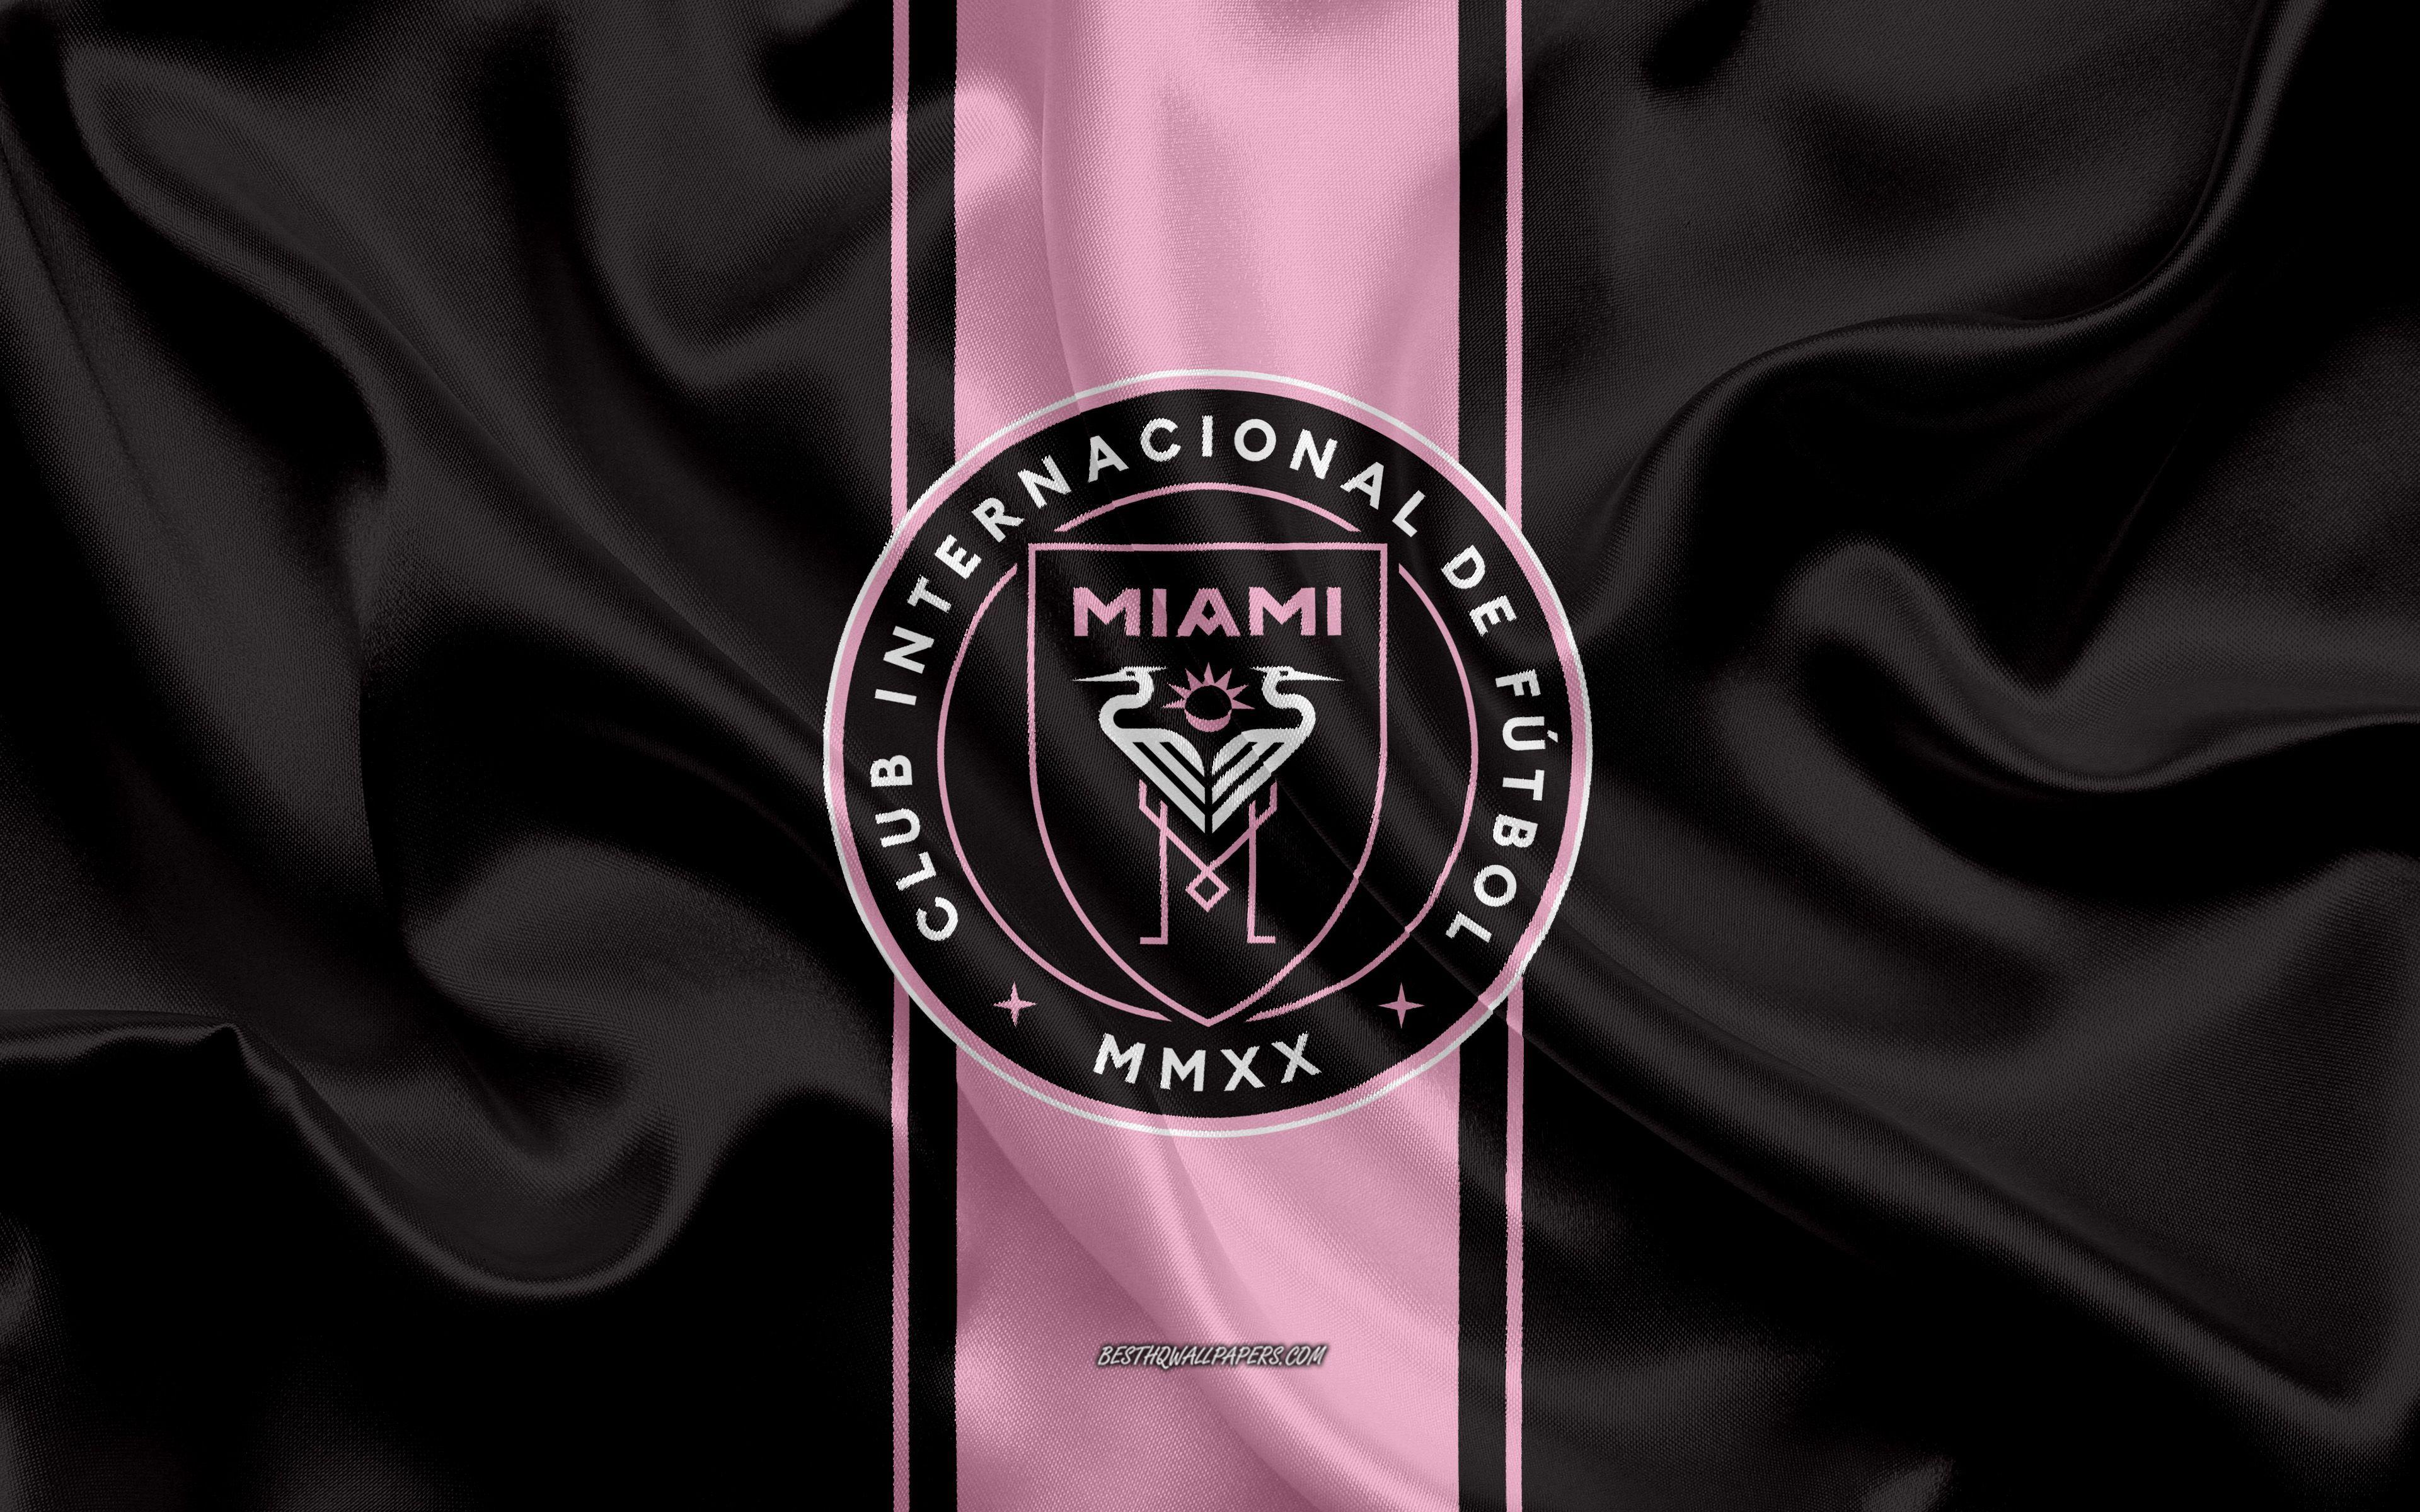 Inter Miami Cf Wallpapers Top Free Inter Miami Cf Backgrounds Wallpaperaccess